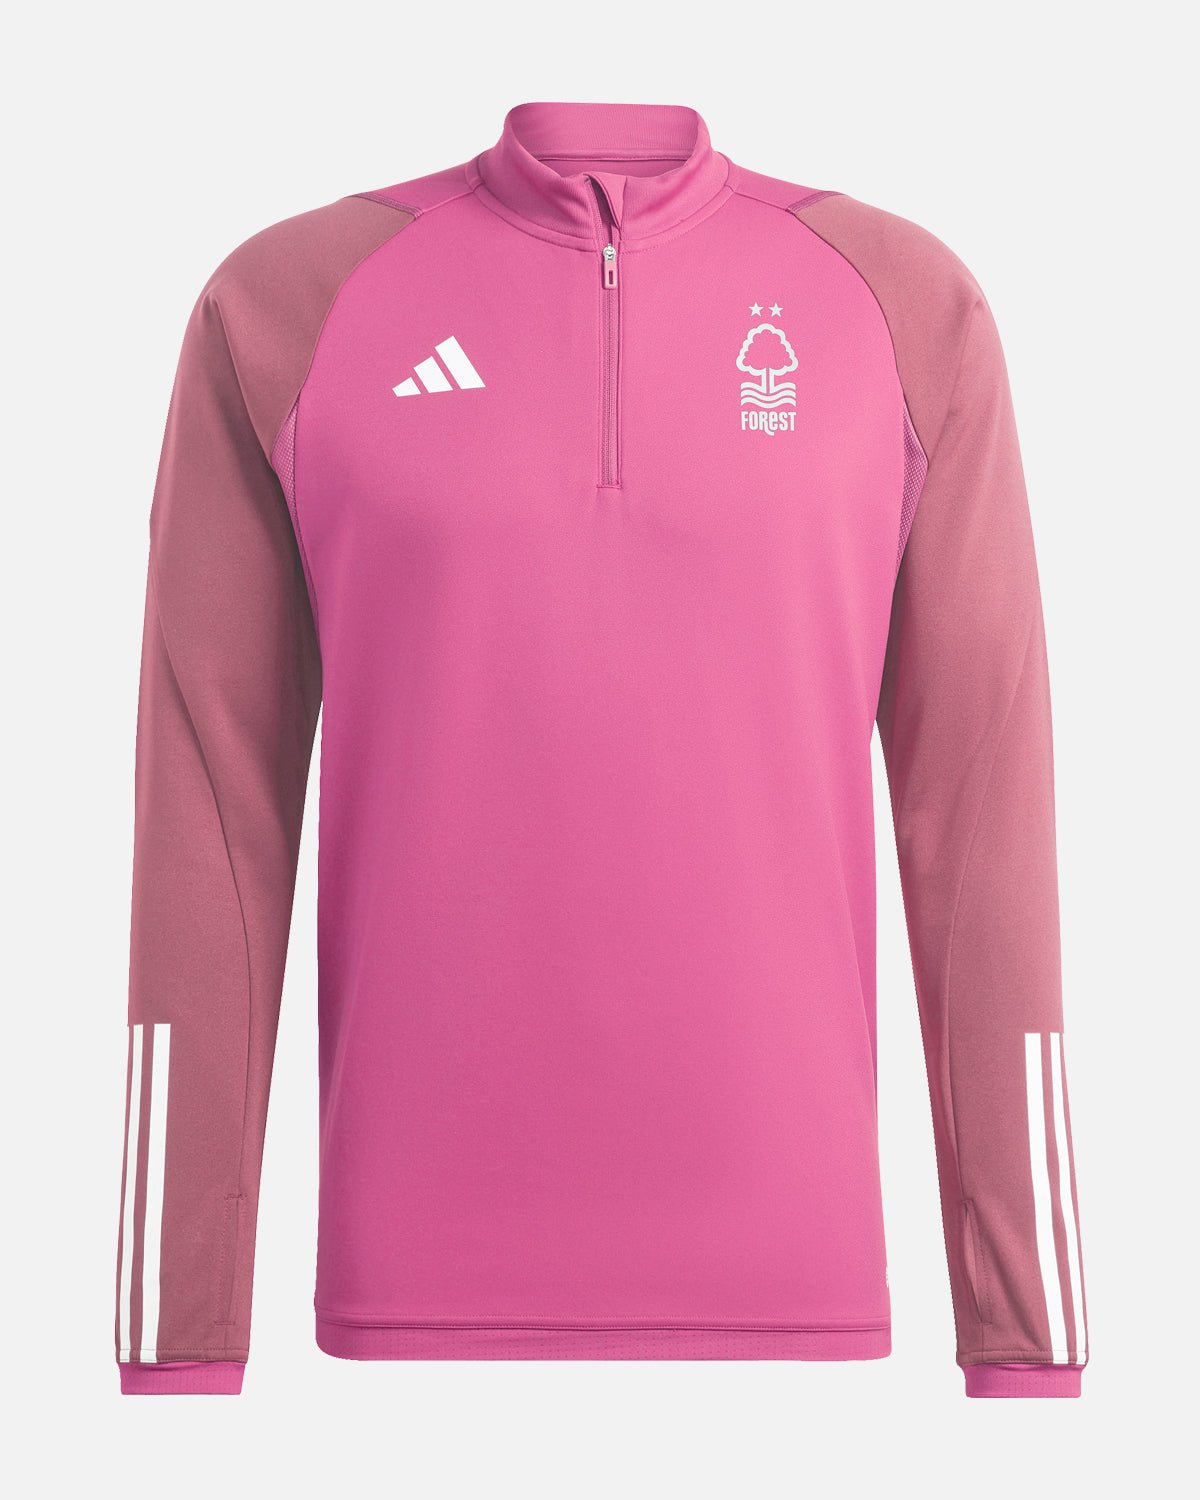 NFFC Pink Warm Up Top 23-24 - Nottingham Forest FC